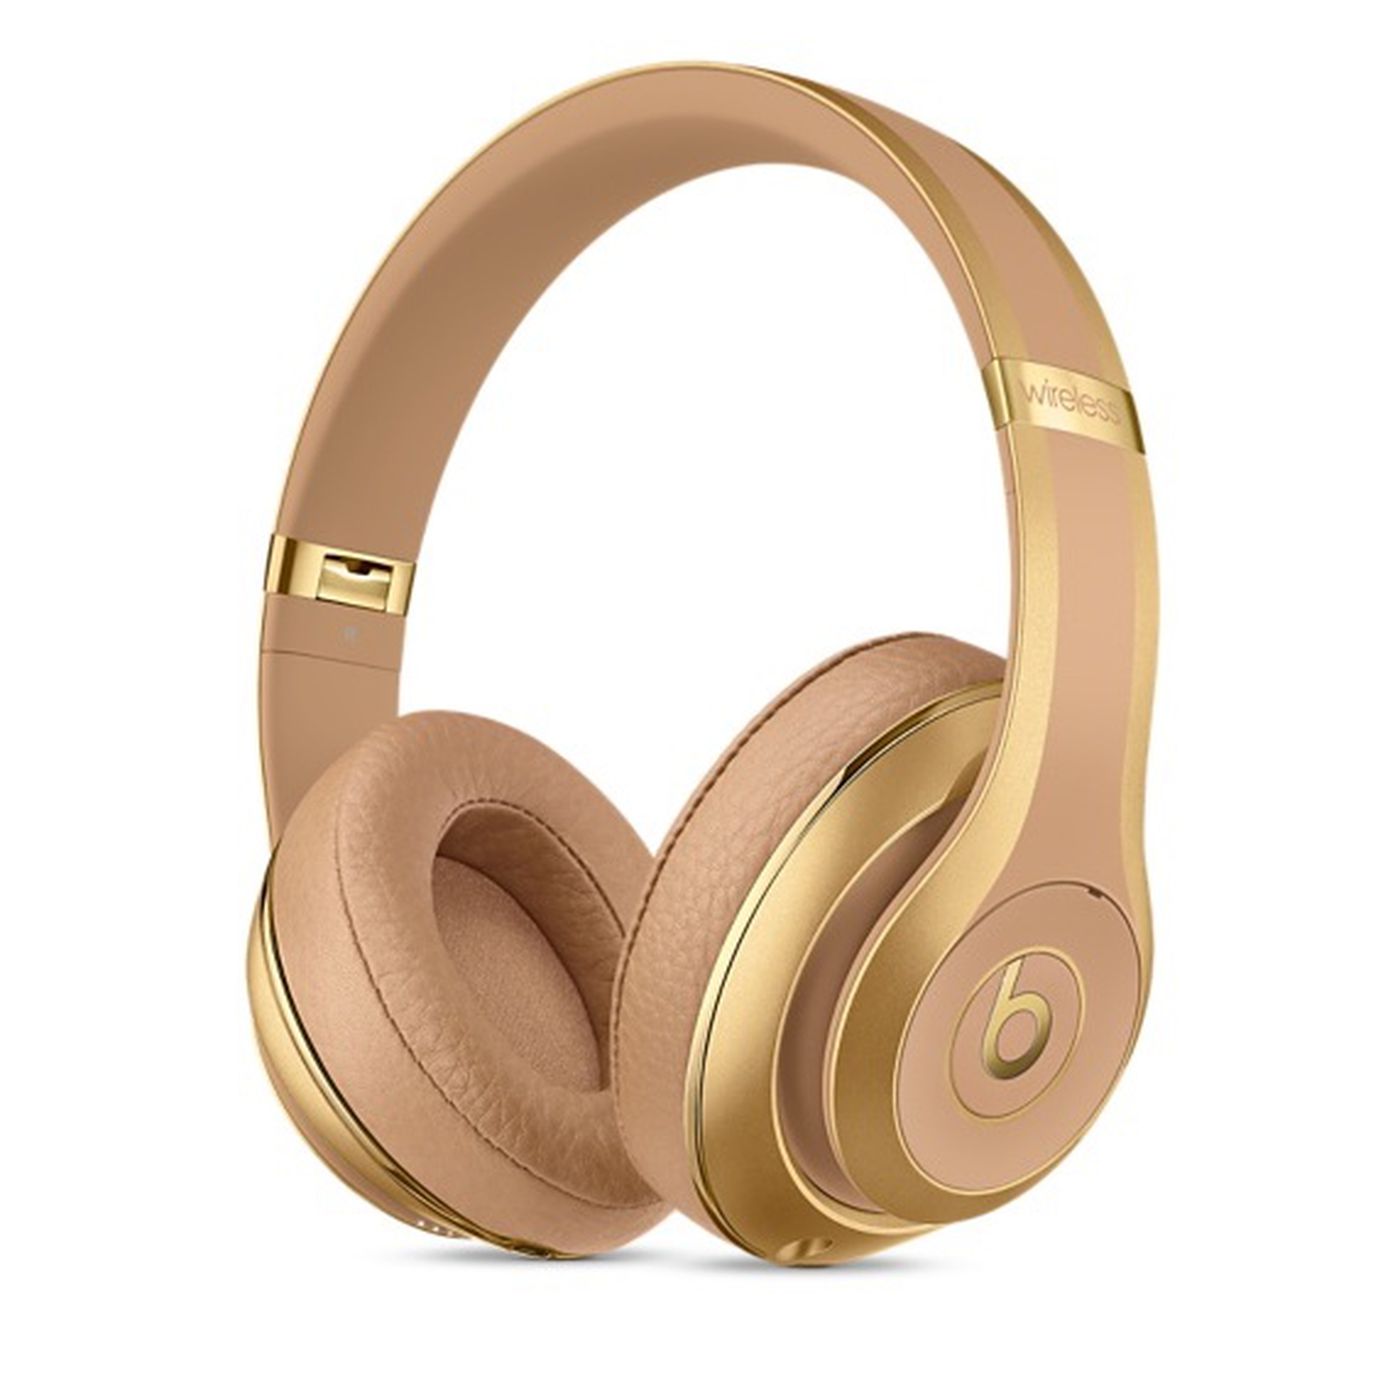 Kylie is the face of new Balmain-branded Beats and headphones - The